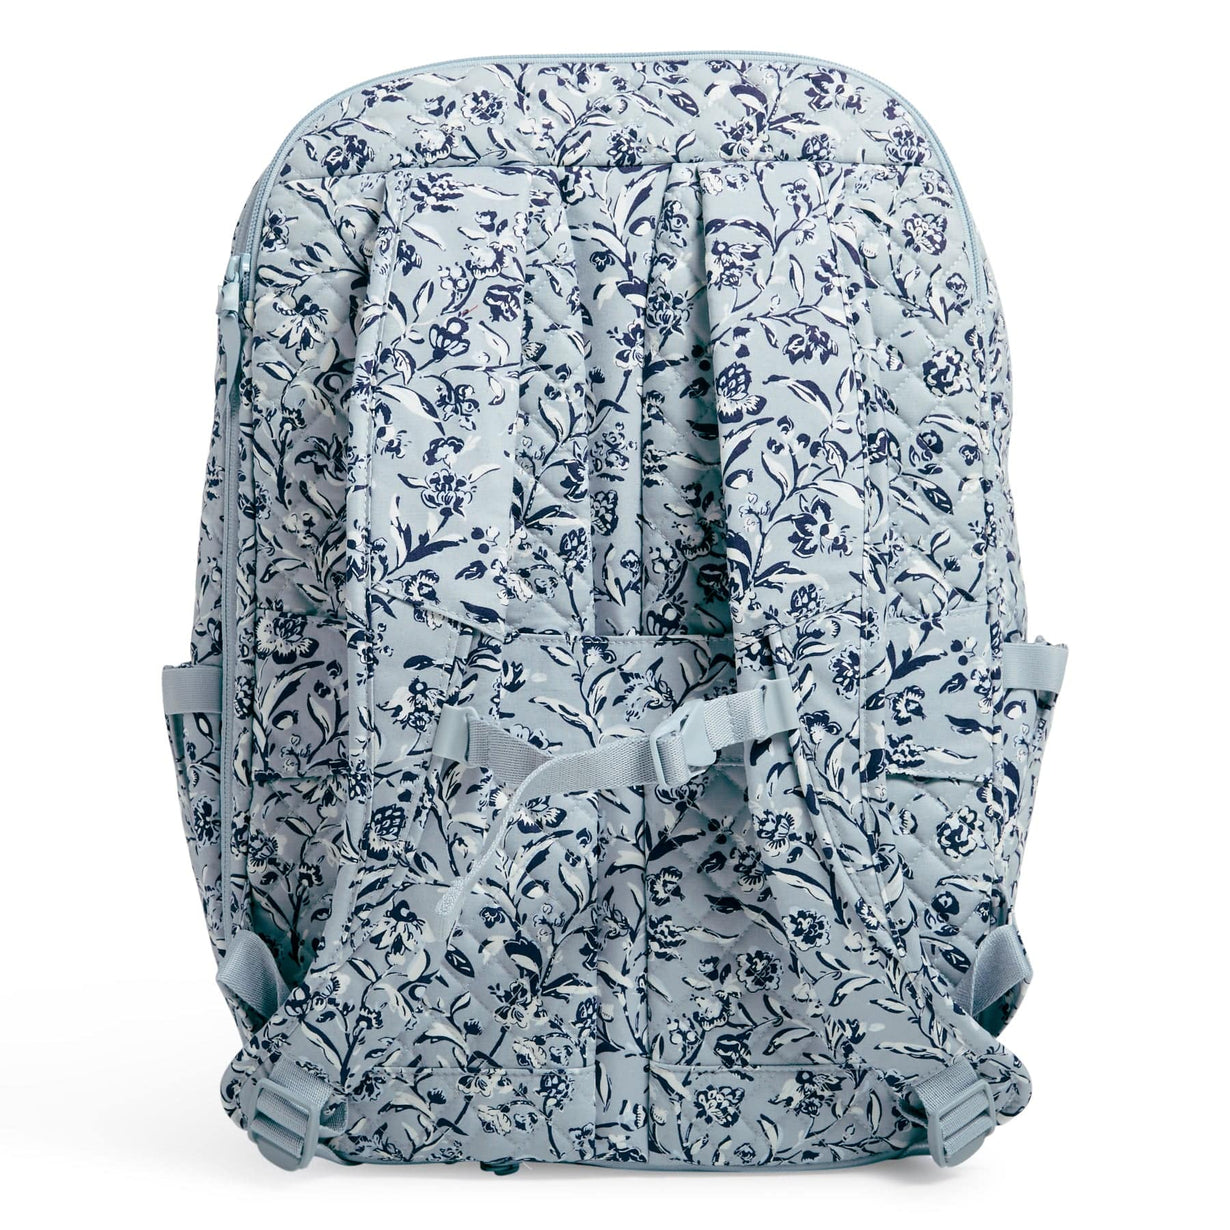 Large Travel Backpack - Recycled Cotton | Vera Bradley